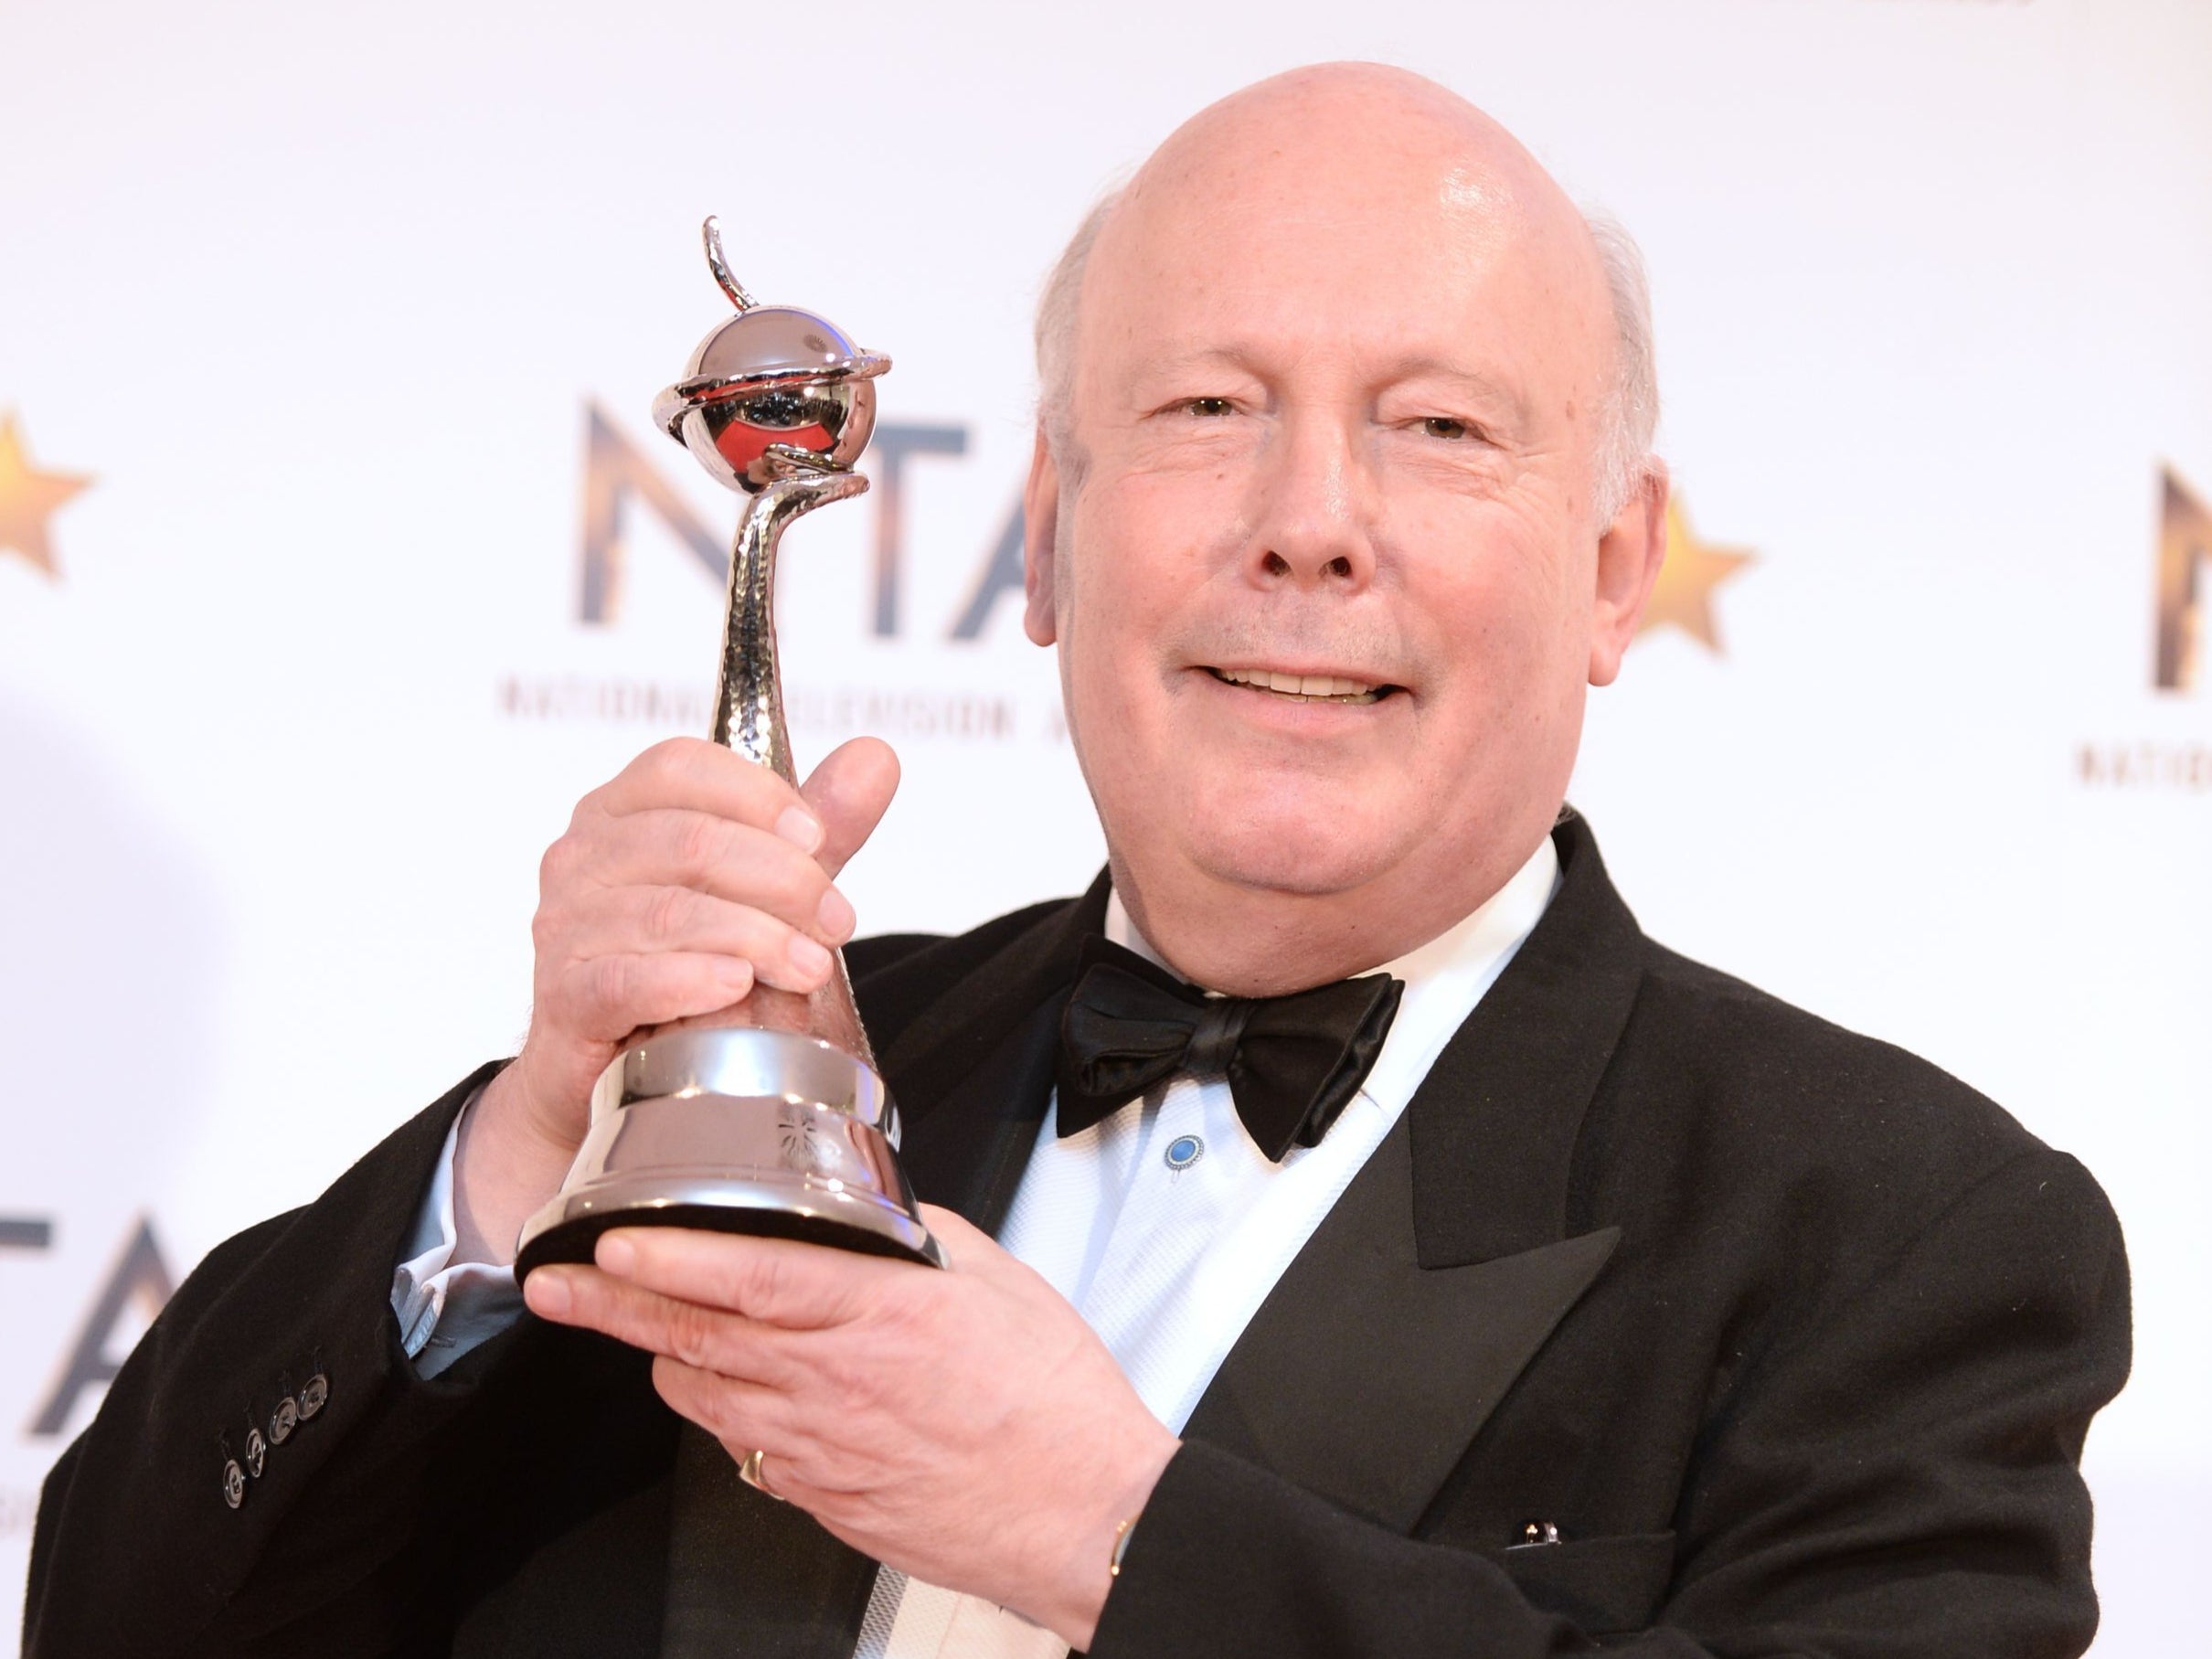 Lord Julian Fellowes, creator of Downton Abbey, at National Television Awards